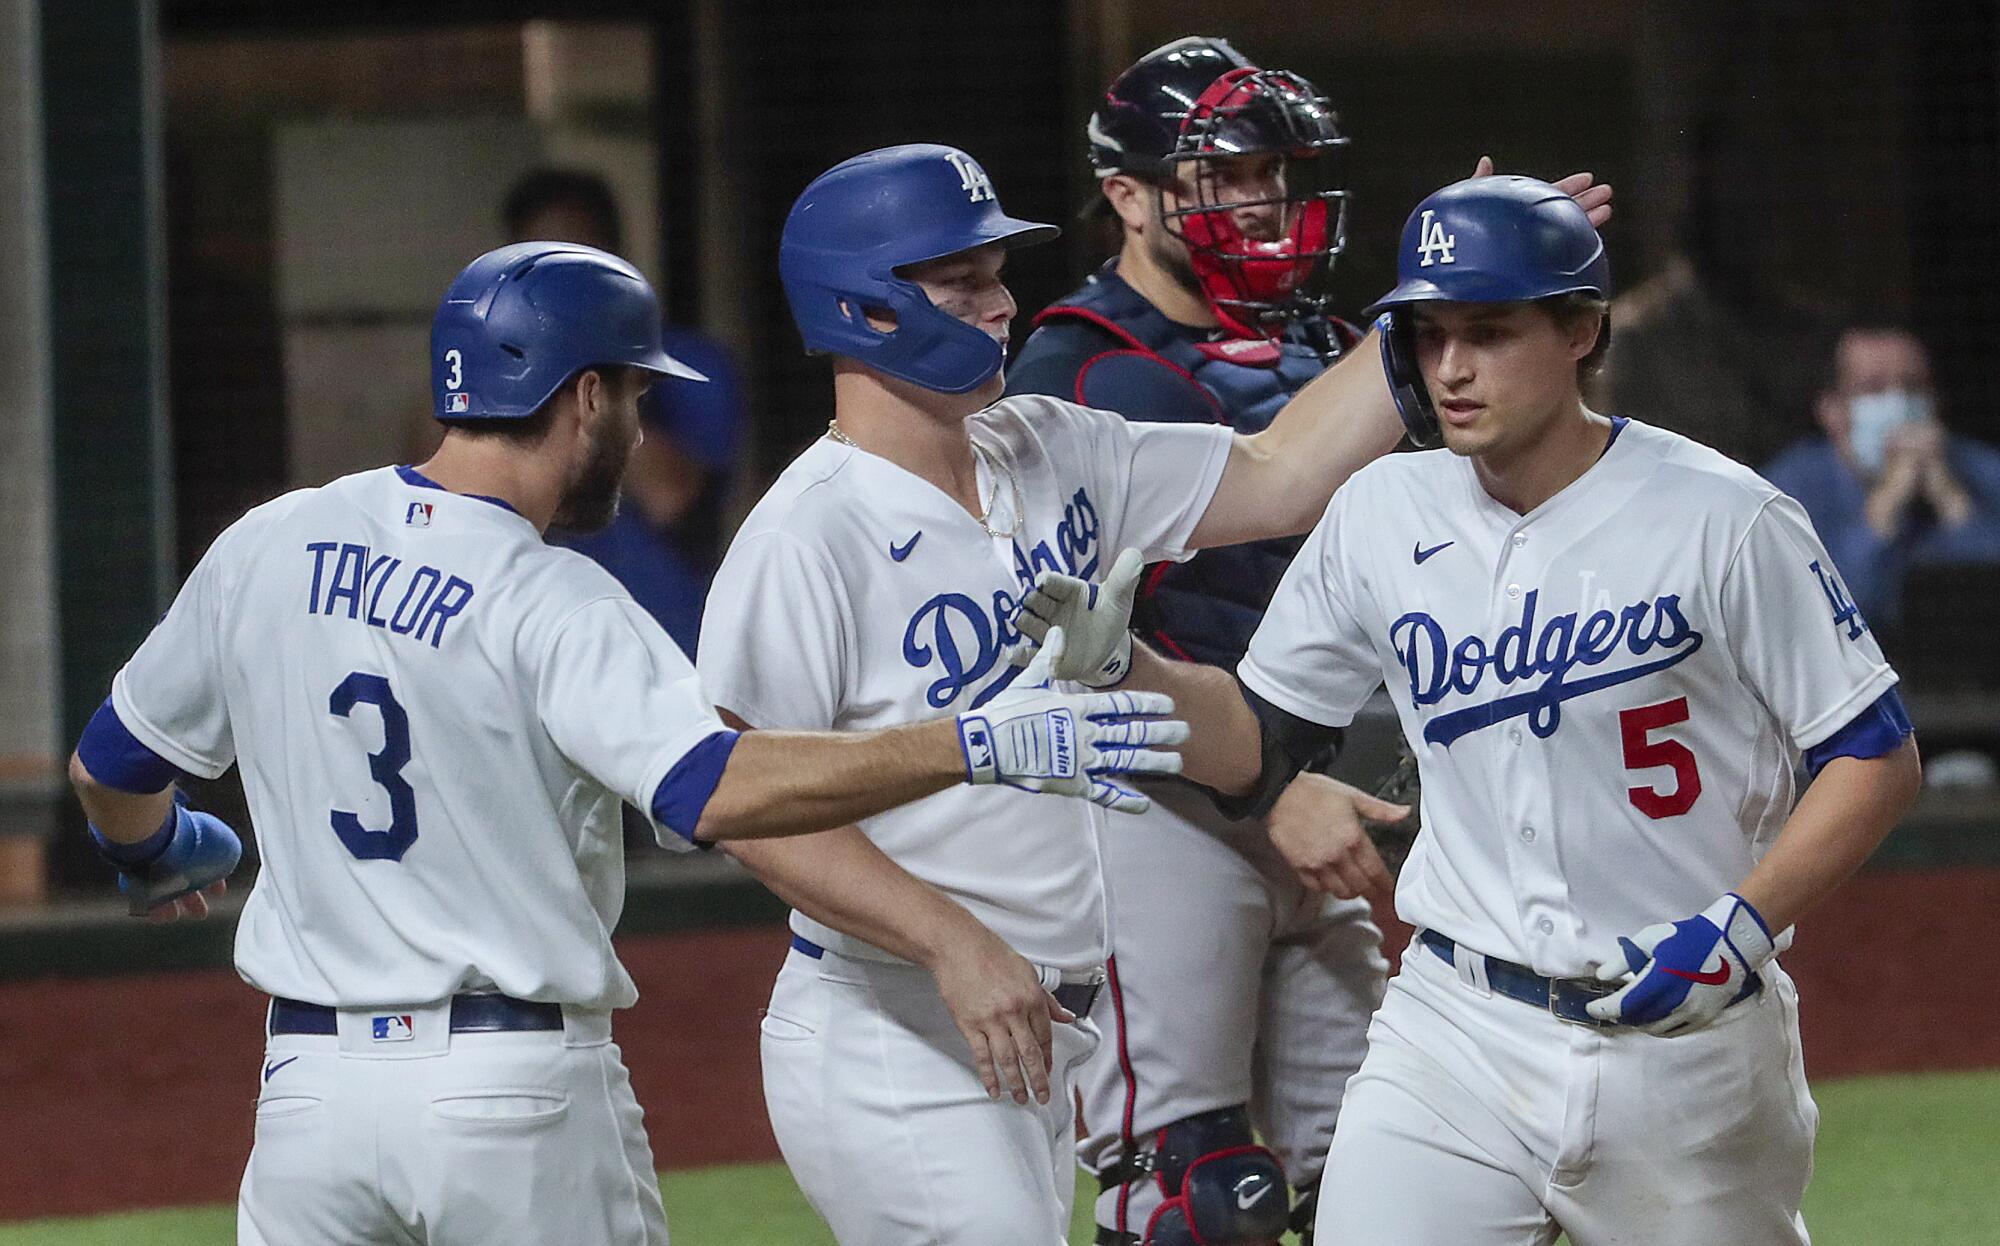 Dodgers shortstop Corey Seager is congratulated by Joc Pederson and Chris Taylor after hitting a three-run home run